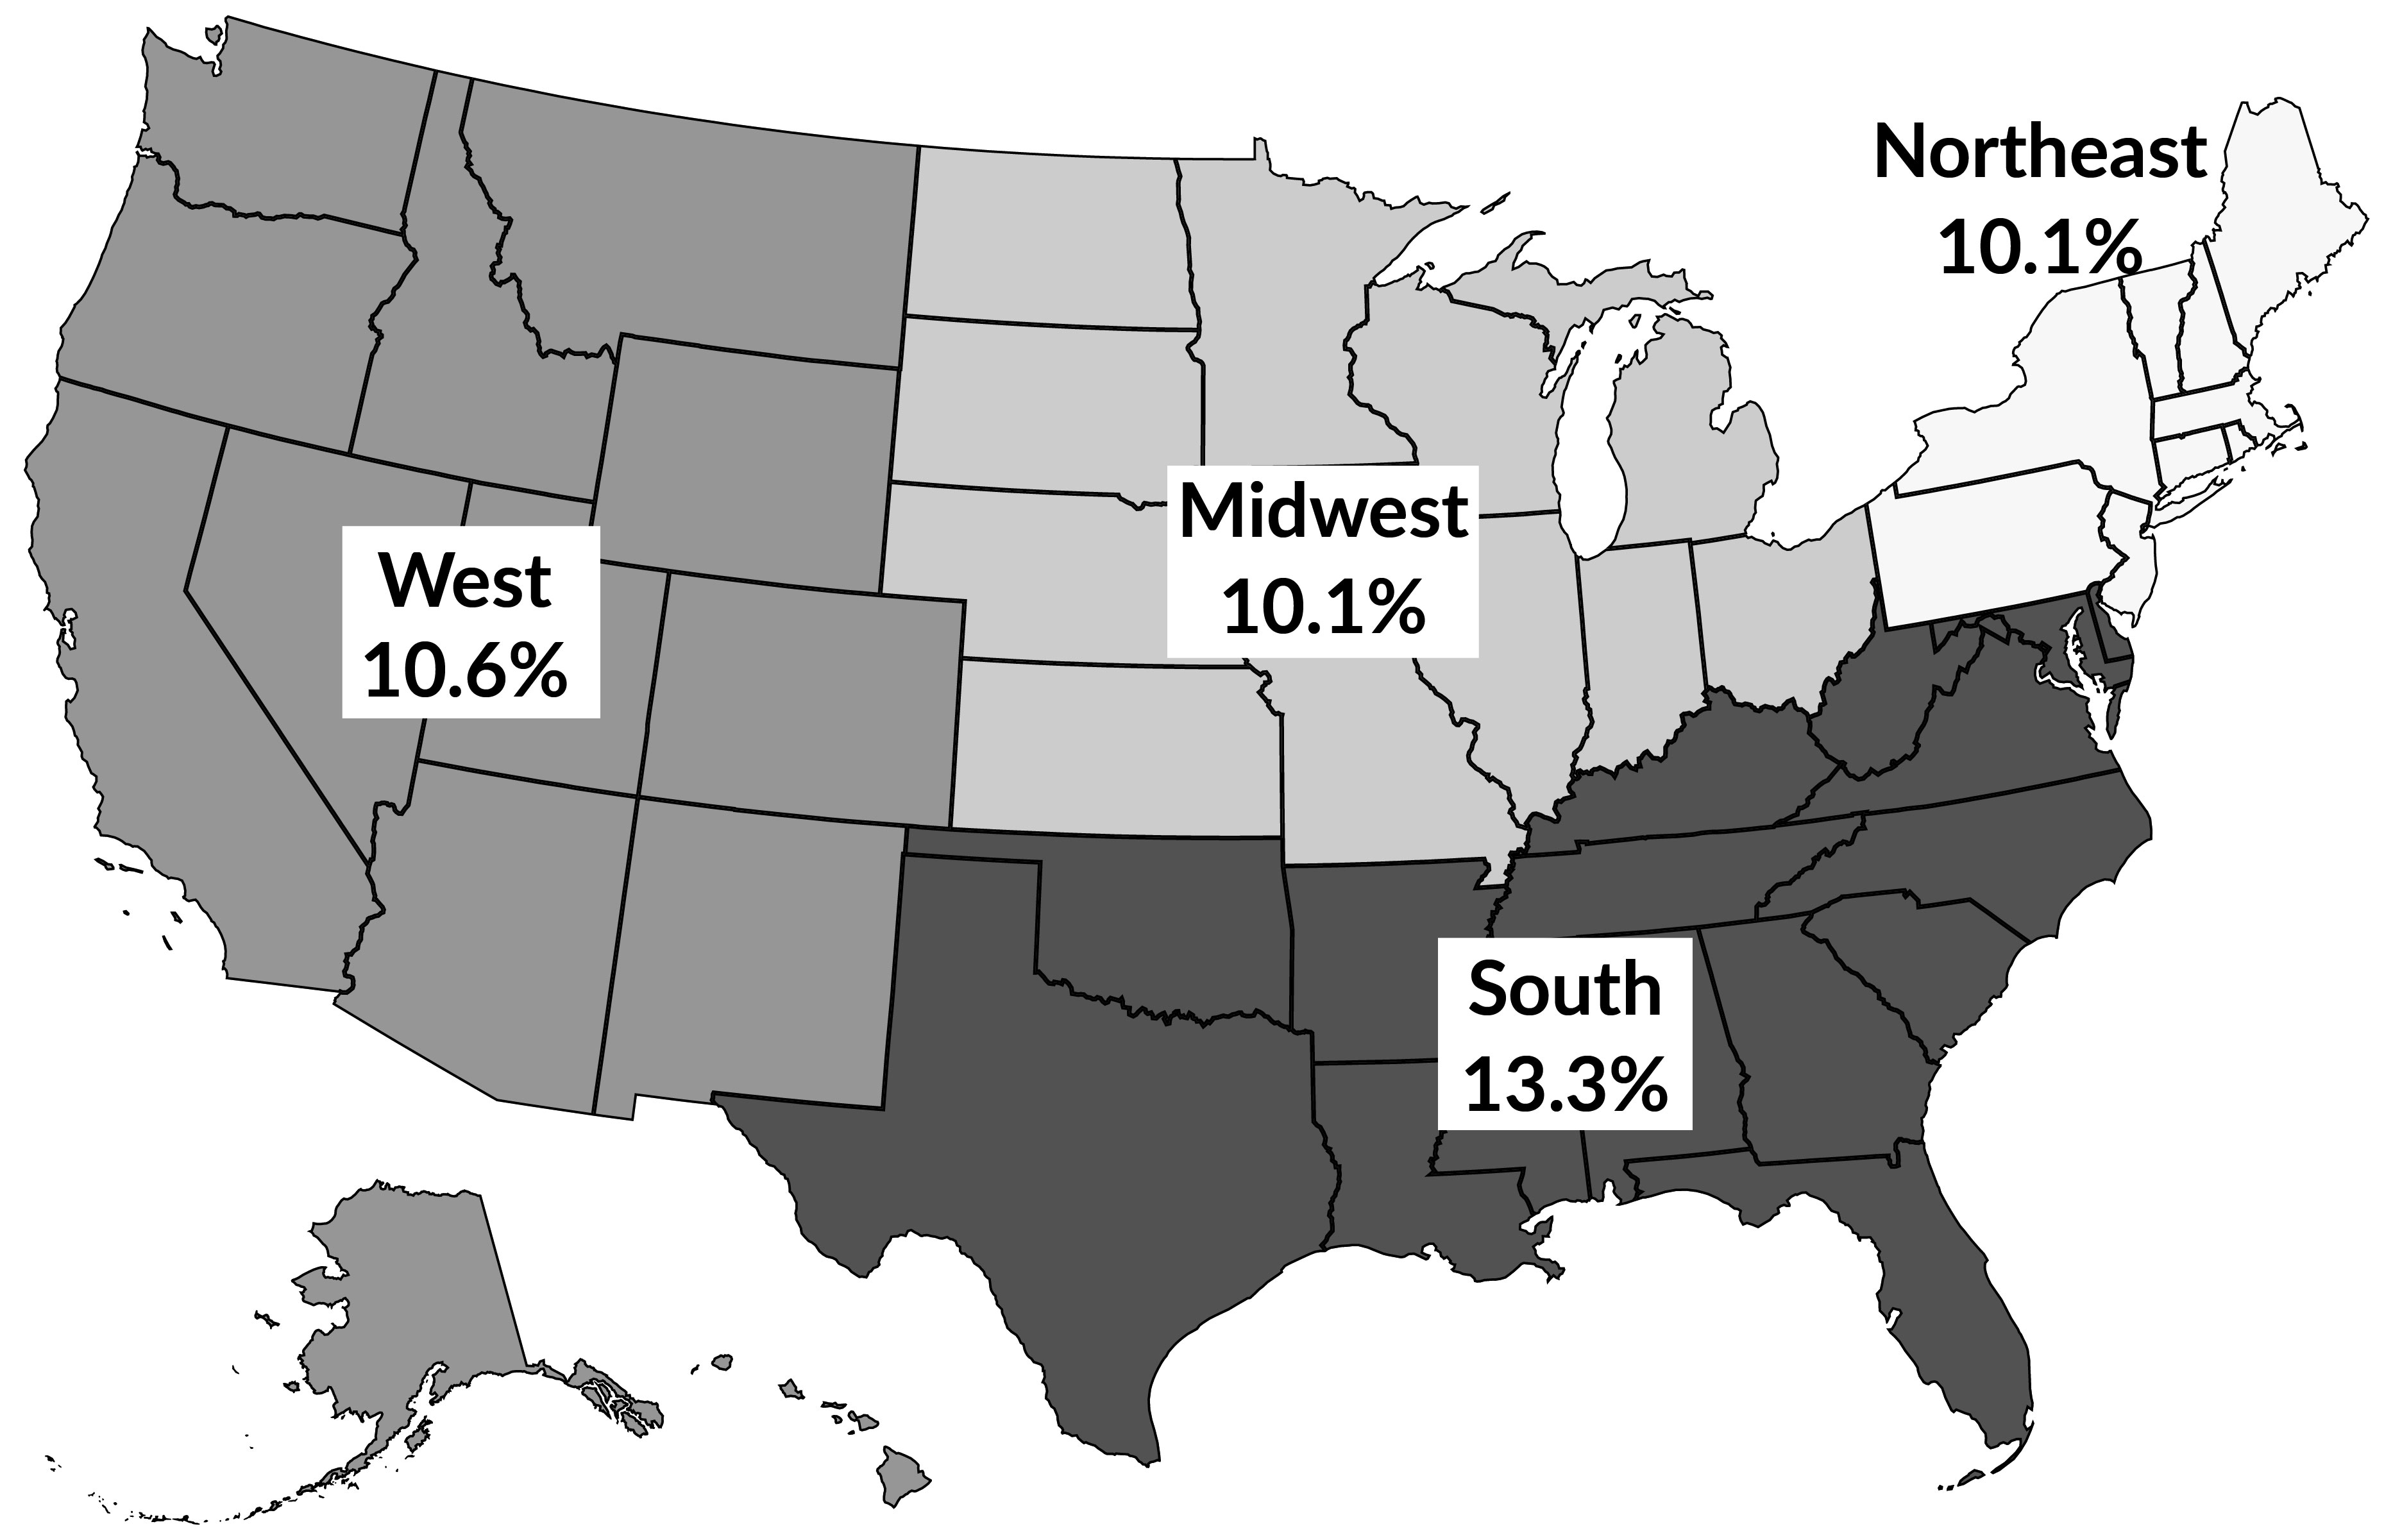 U.S. map showing poverty rates by region. South 13.3%, West 10.6%, Midwest 10.1%, and Northeast 10.1%.